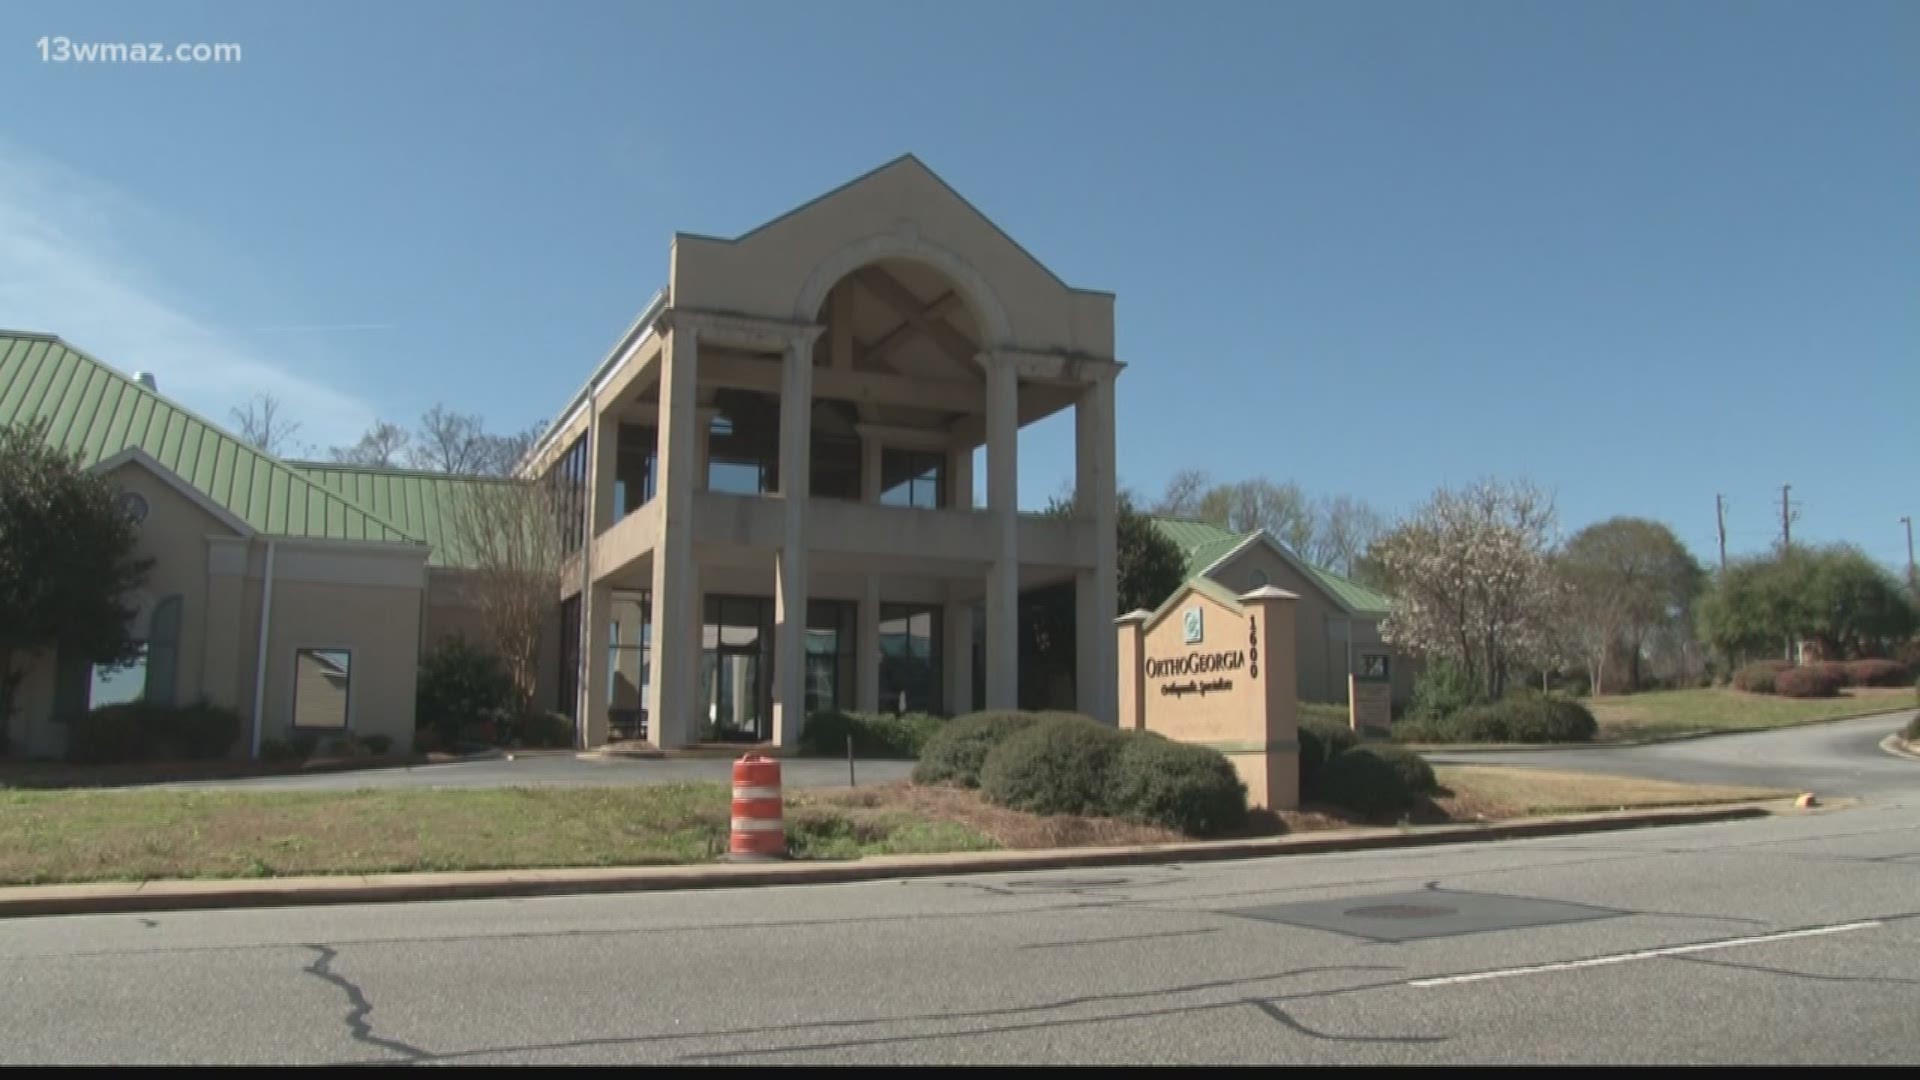 The Macon-Bibb Health Department is planning to move from their current location on Emery Highway to an old OrthoGeorgia building on Forsyth Street. Renovations are also in store for the new site, including better parking and waiting areas.